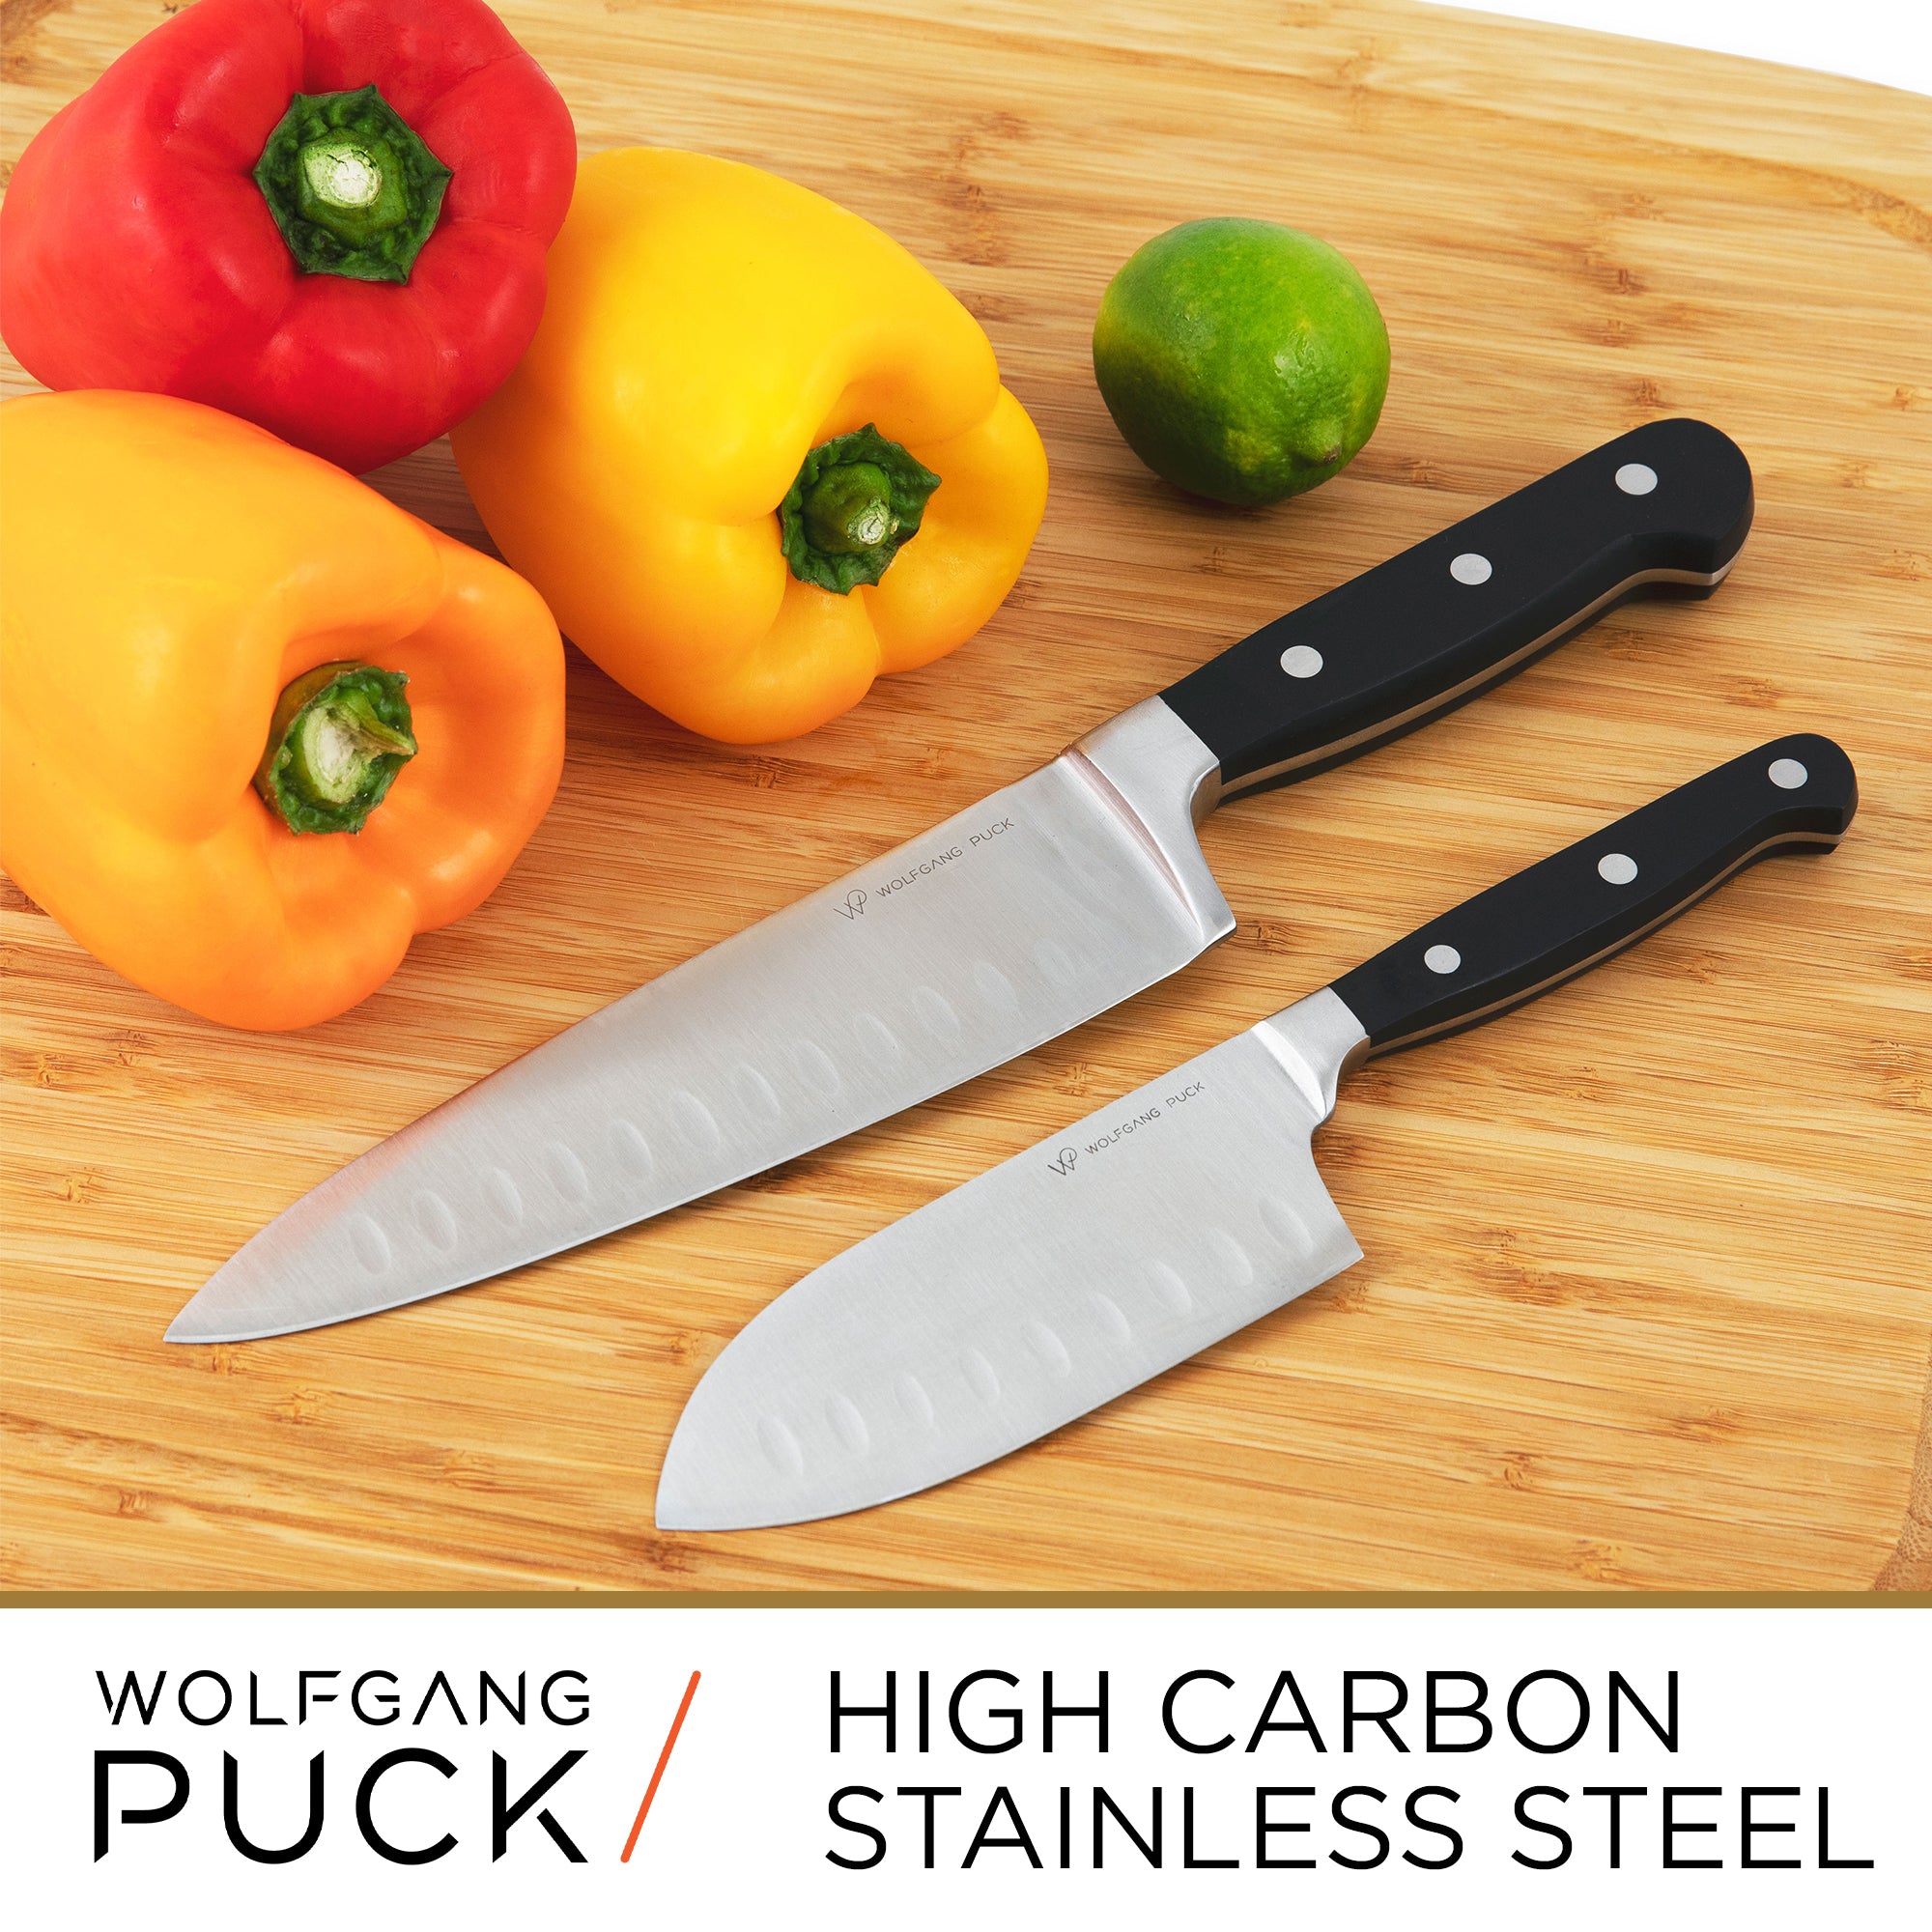 high carbon stainless steel knives by Wolfgang Puck